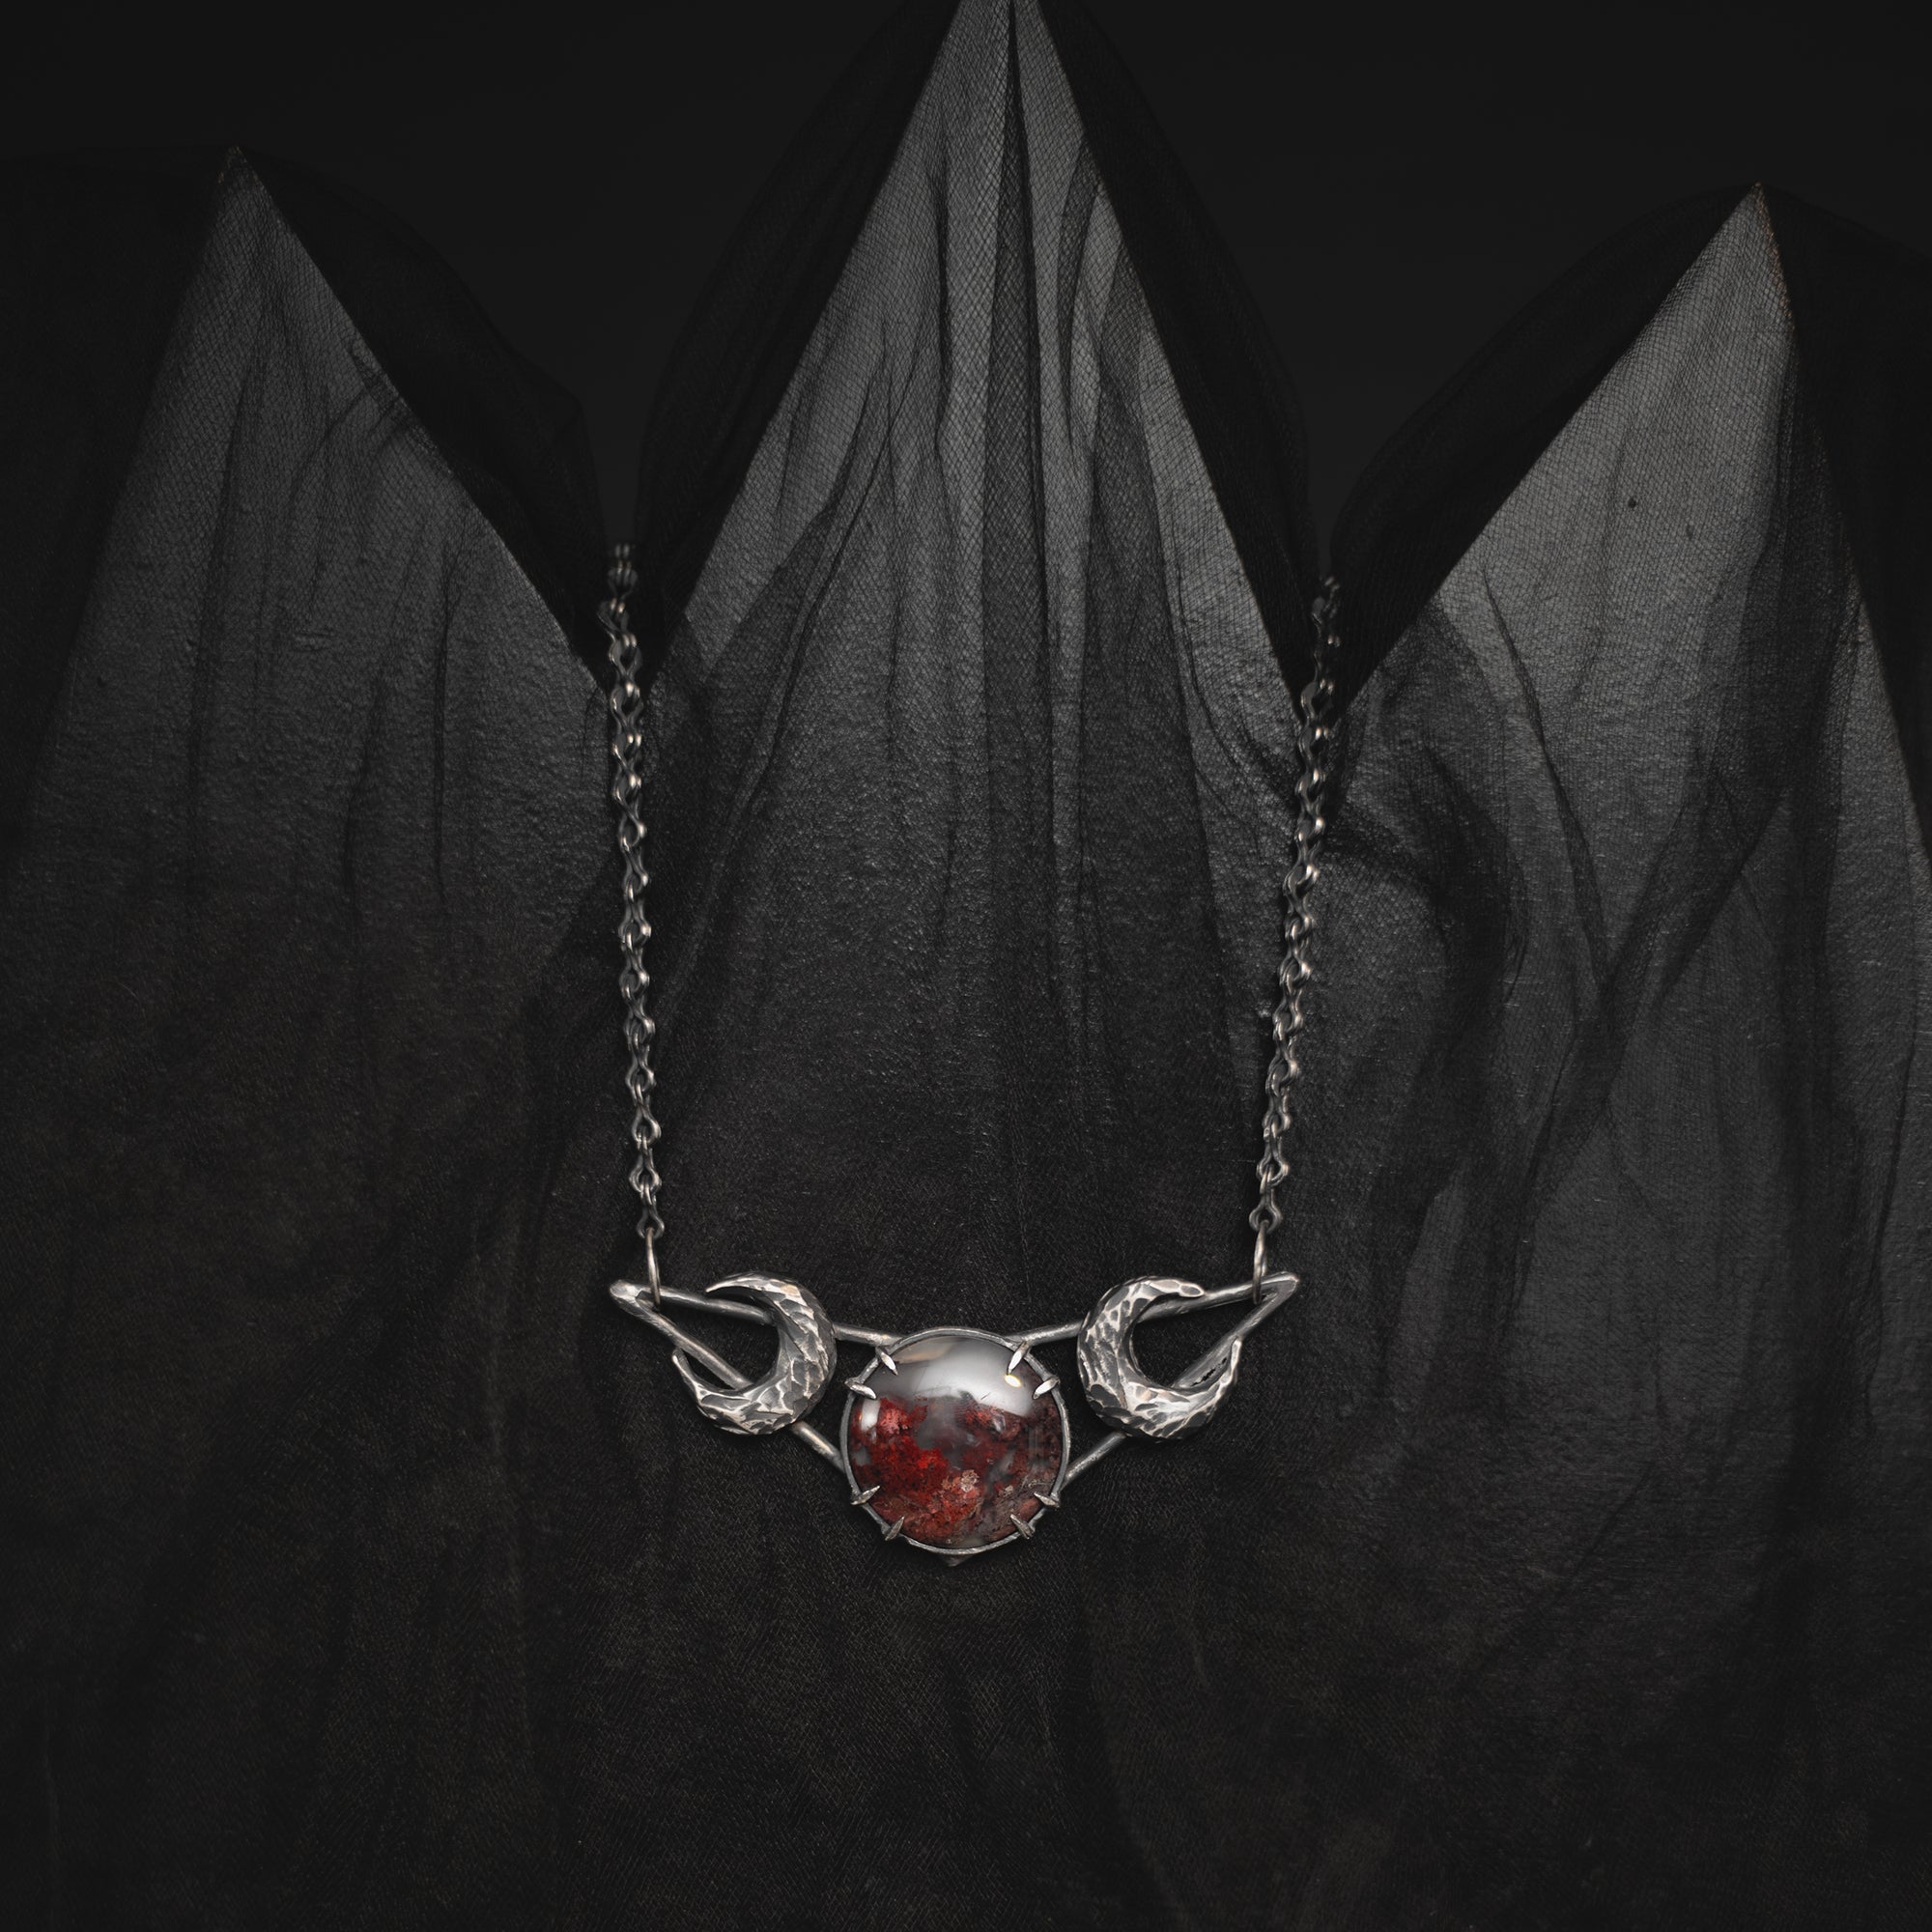 Watch You Bleed Necklace